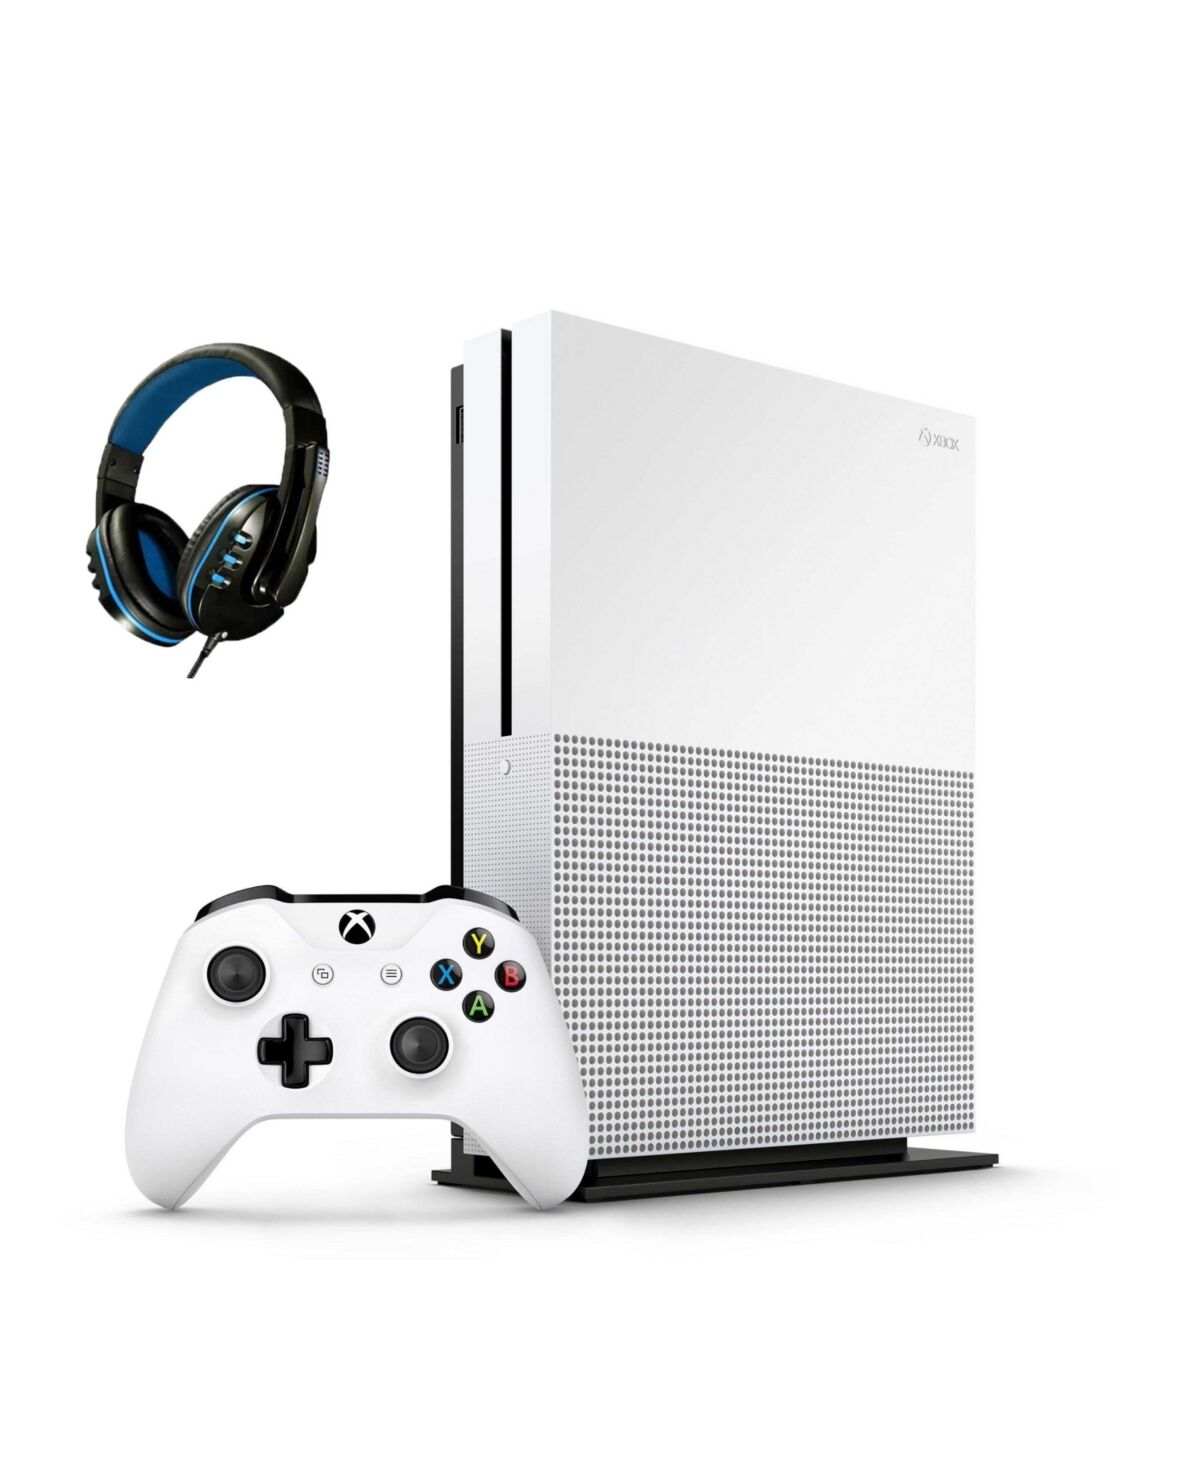 Bolt Axtion Microsoft Xbox One S 500GB Gaming Console White with Bolt Axtion Bundle Like New - White